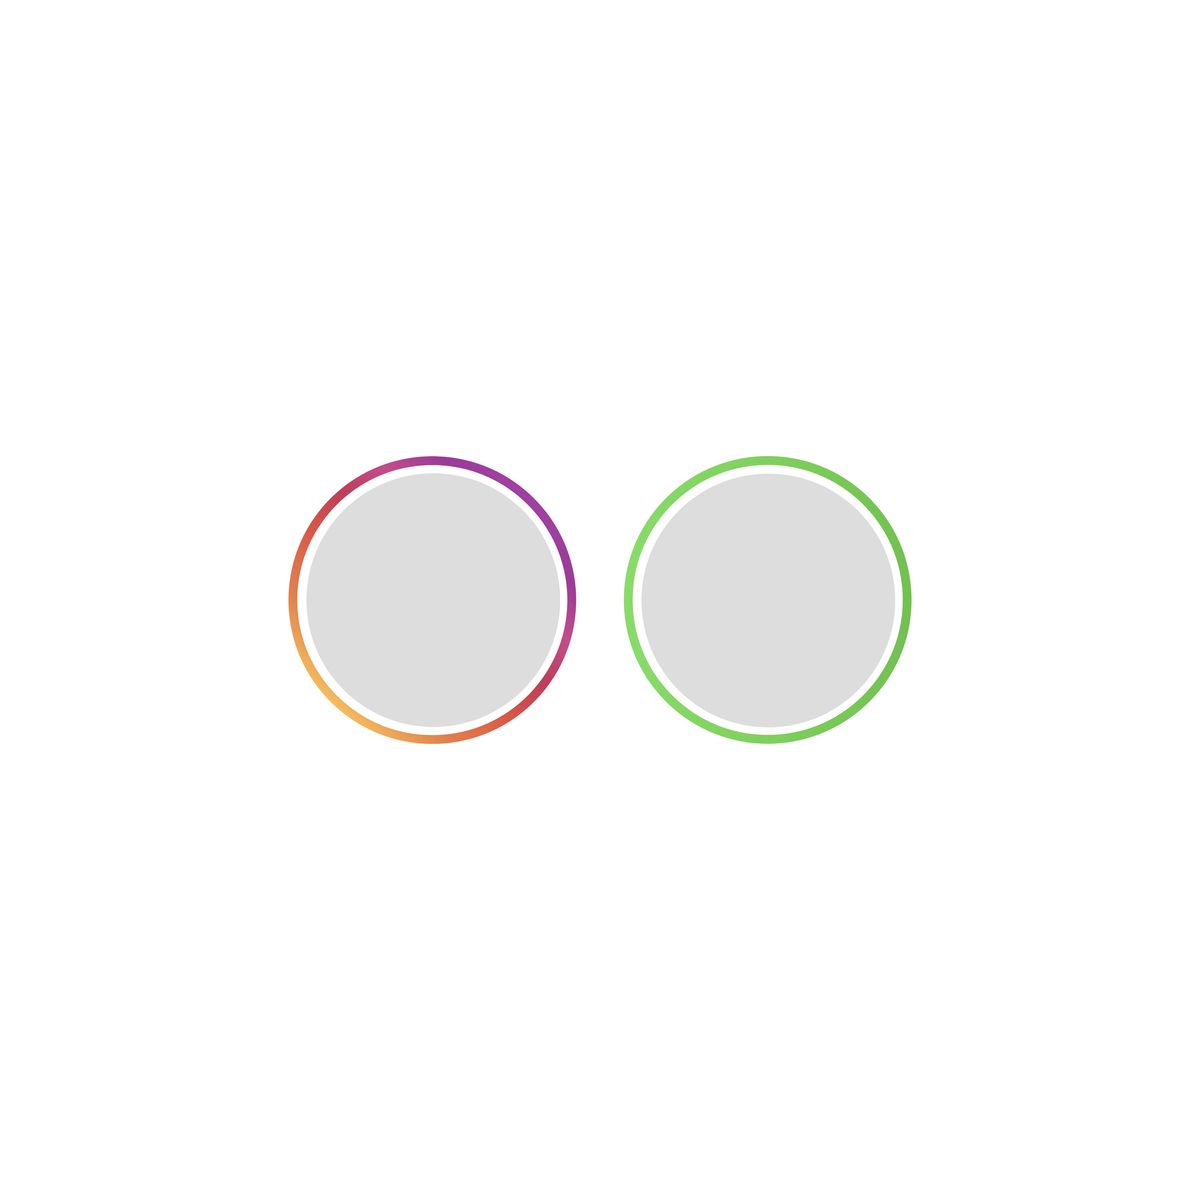 What Does the Green Circle Mean on Instagram?